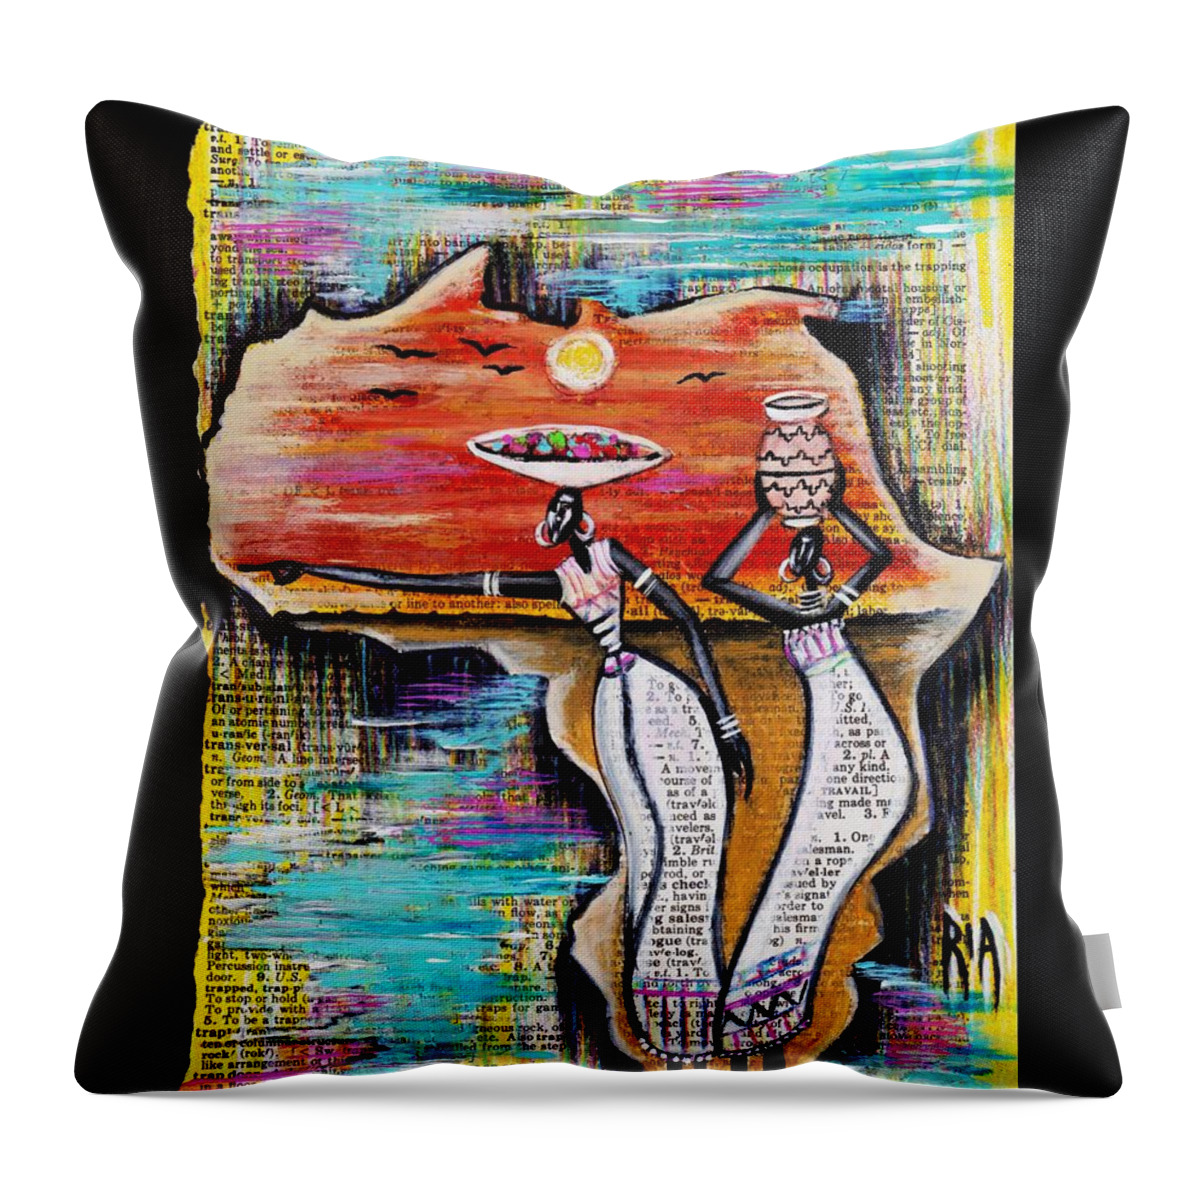 Artistria Throw Pillow featuring the photograph We Gon Shine by Artist RiA